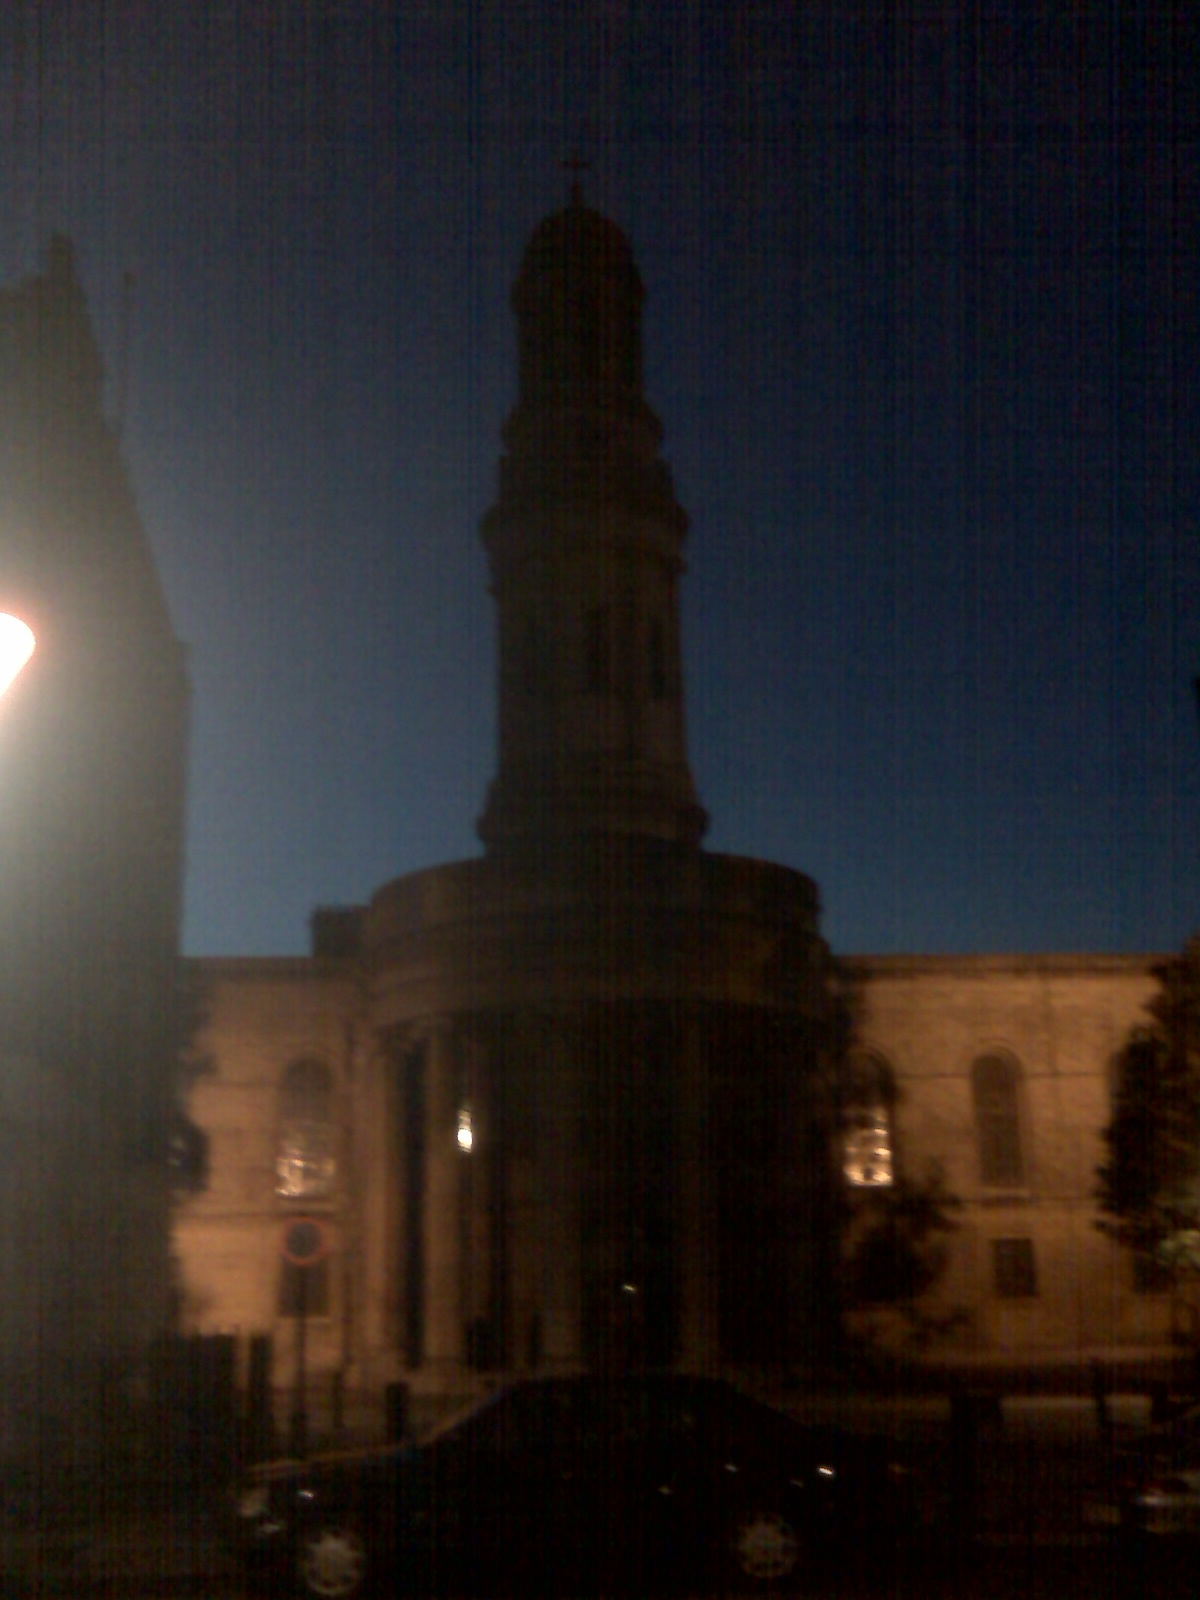 Some domed building as night draws in over Marylebone